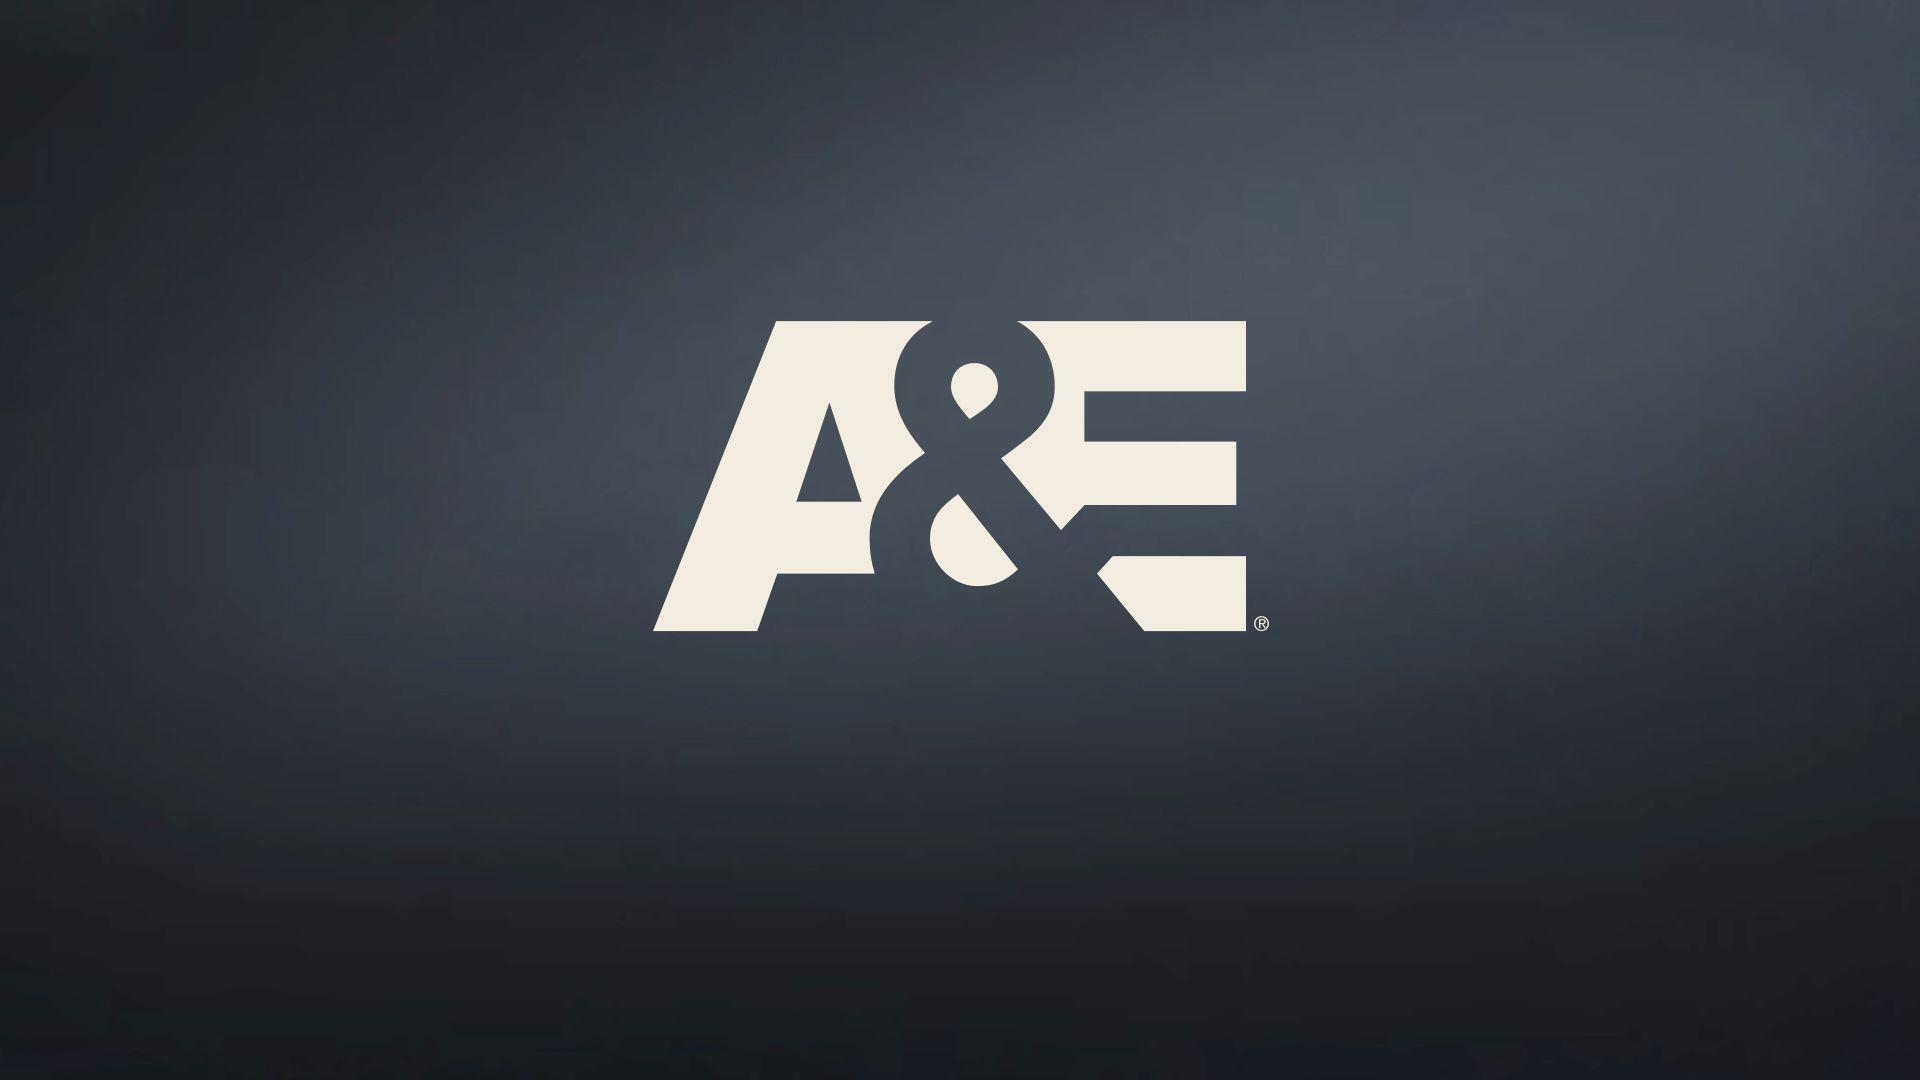 We TV Network Logo - A&E | Watch Full Episodes of Your Favorite Shows